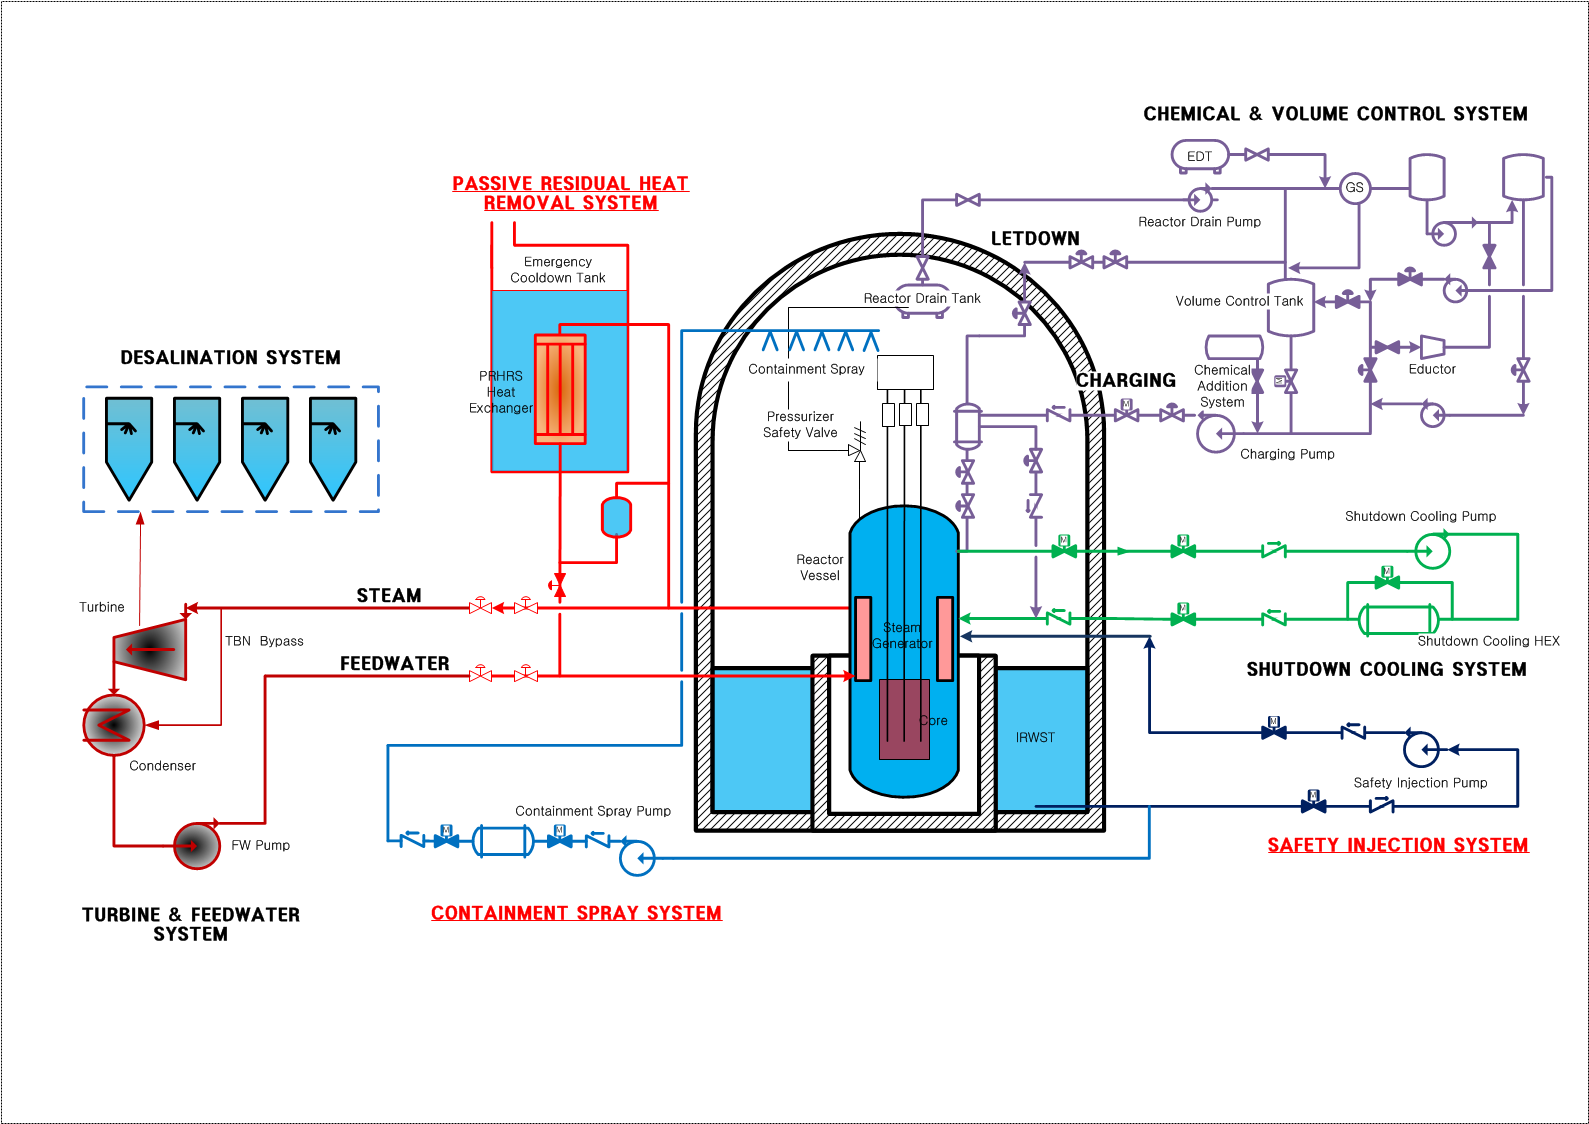 Schematic diagram of SMART safety system